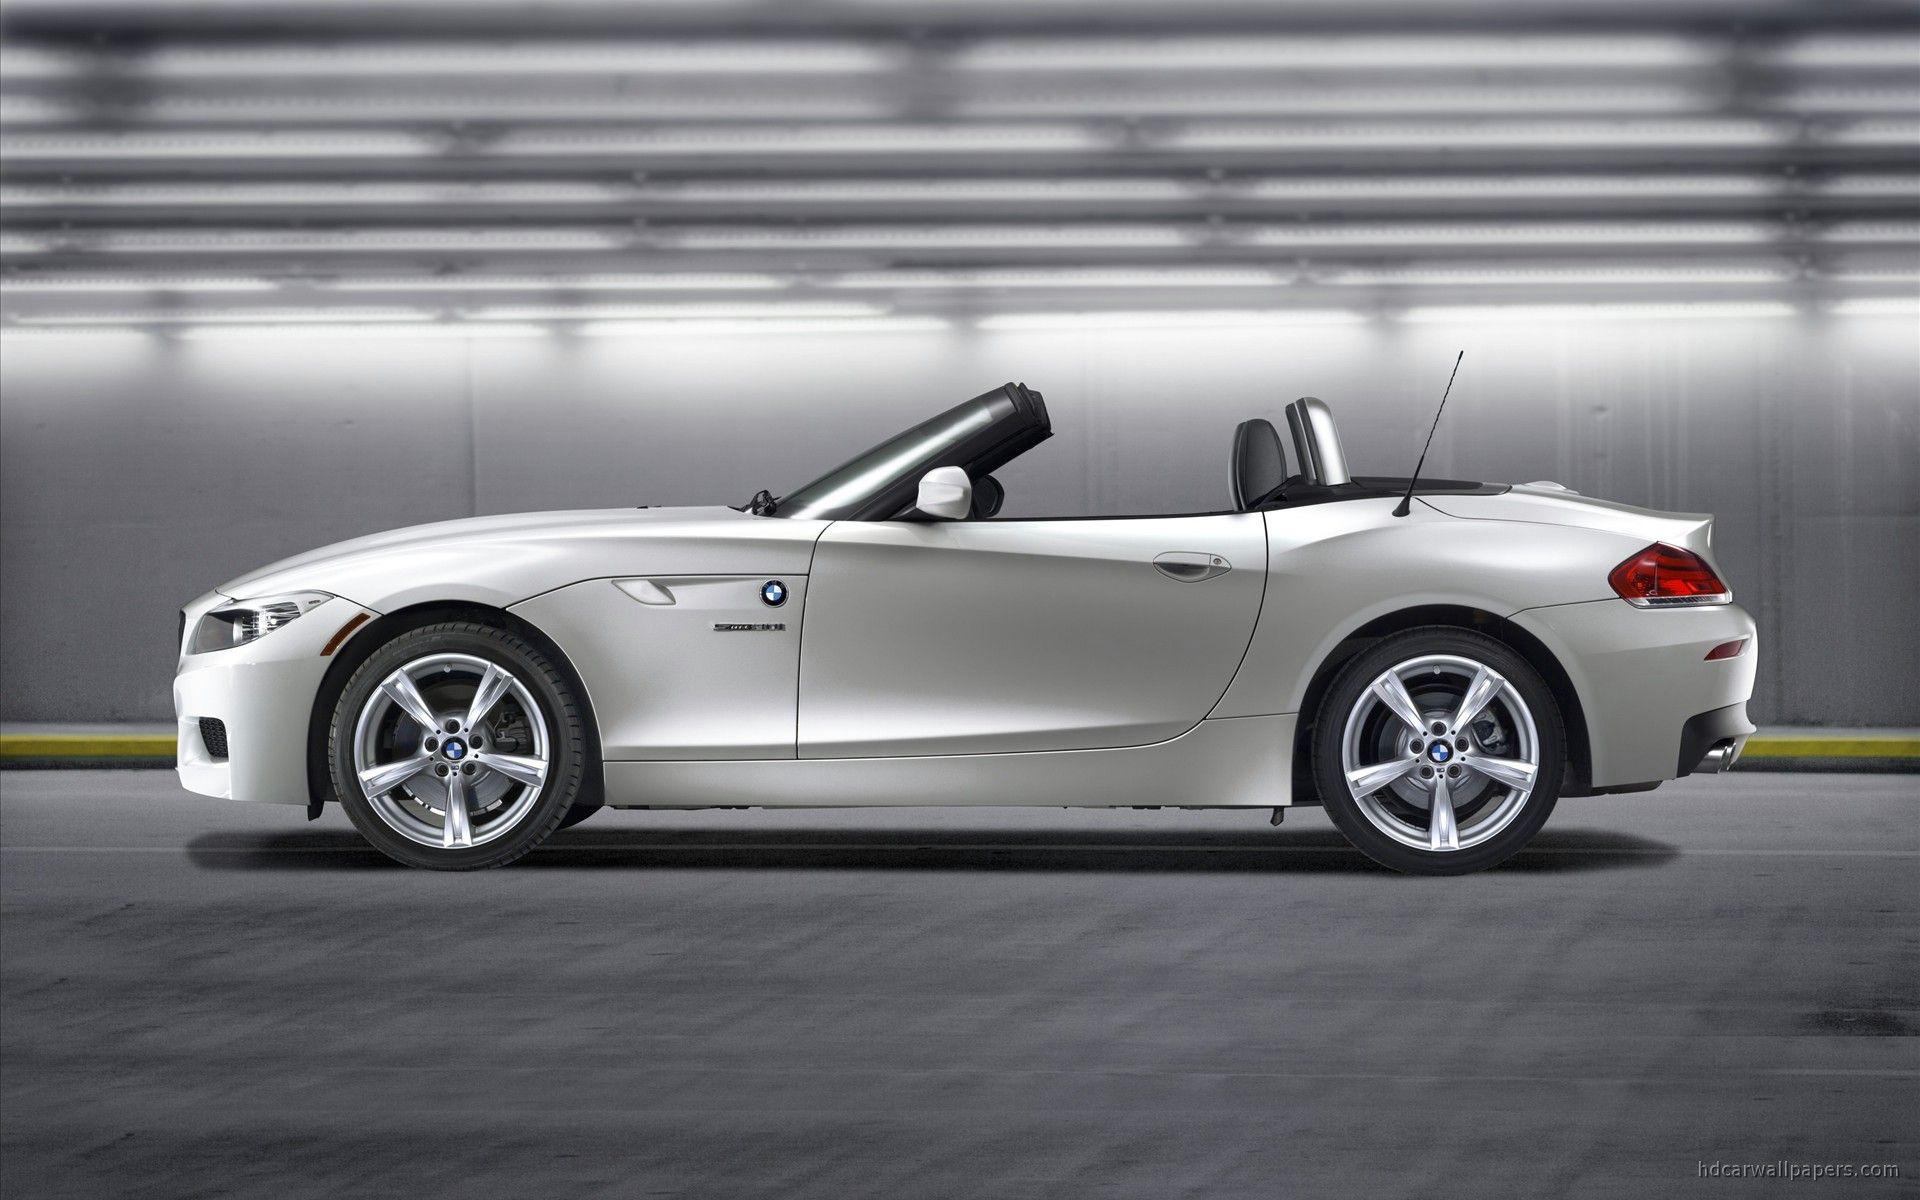 Bmw Z4 Wallpapers Top Free Bmw Z4 Backgrounds Wallpaperaccess